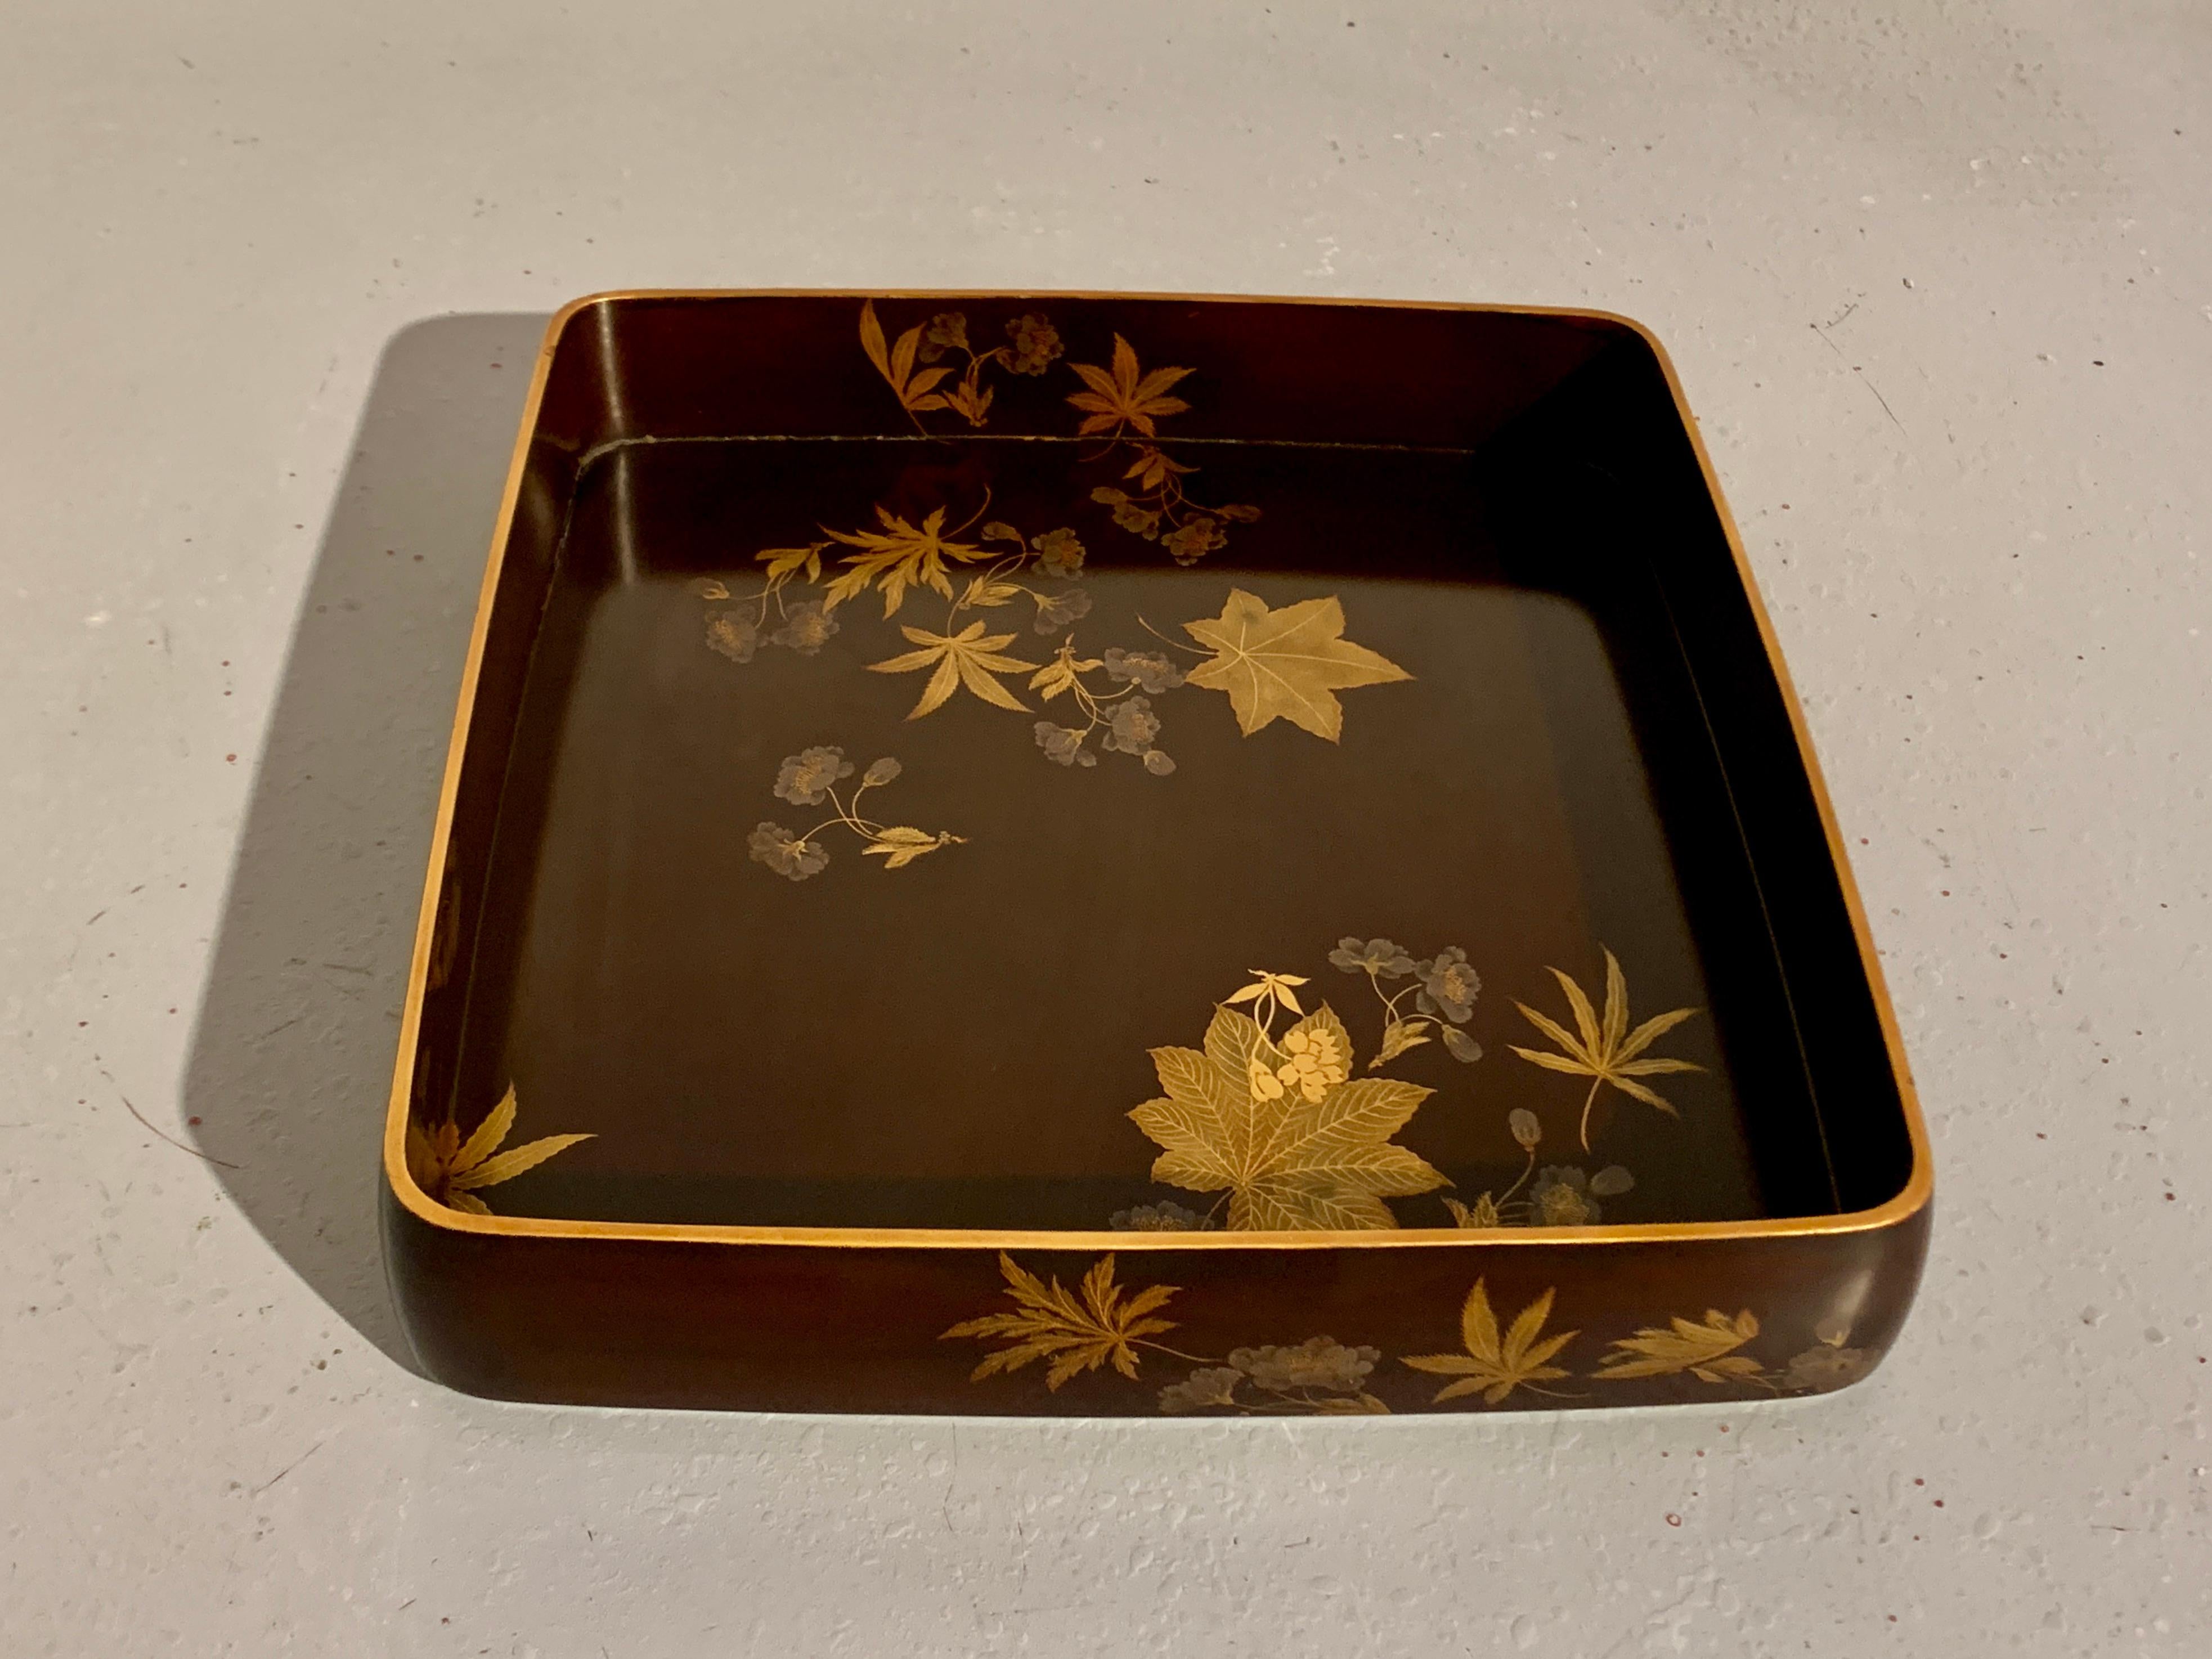 A lovely Japanese lacquer decorated tray with images of hemp leaves, maple leaves, and cherry blossoms by Zohiko, Meiji or Taisho Period, early 20th century, Japan.

The graceful tray expertly crafted with rounded corners and edges. Decorated in